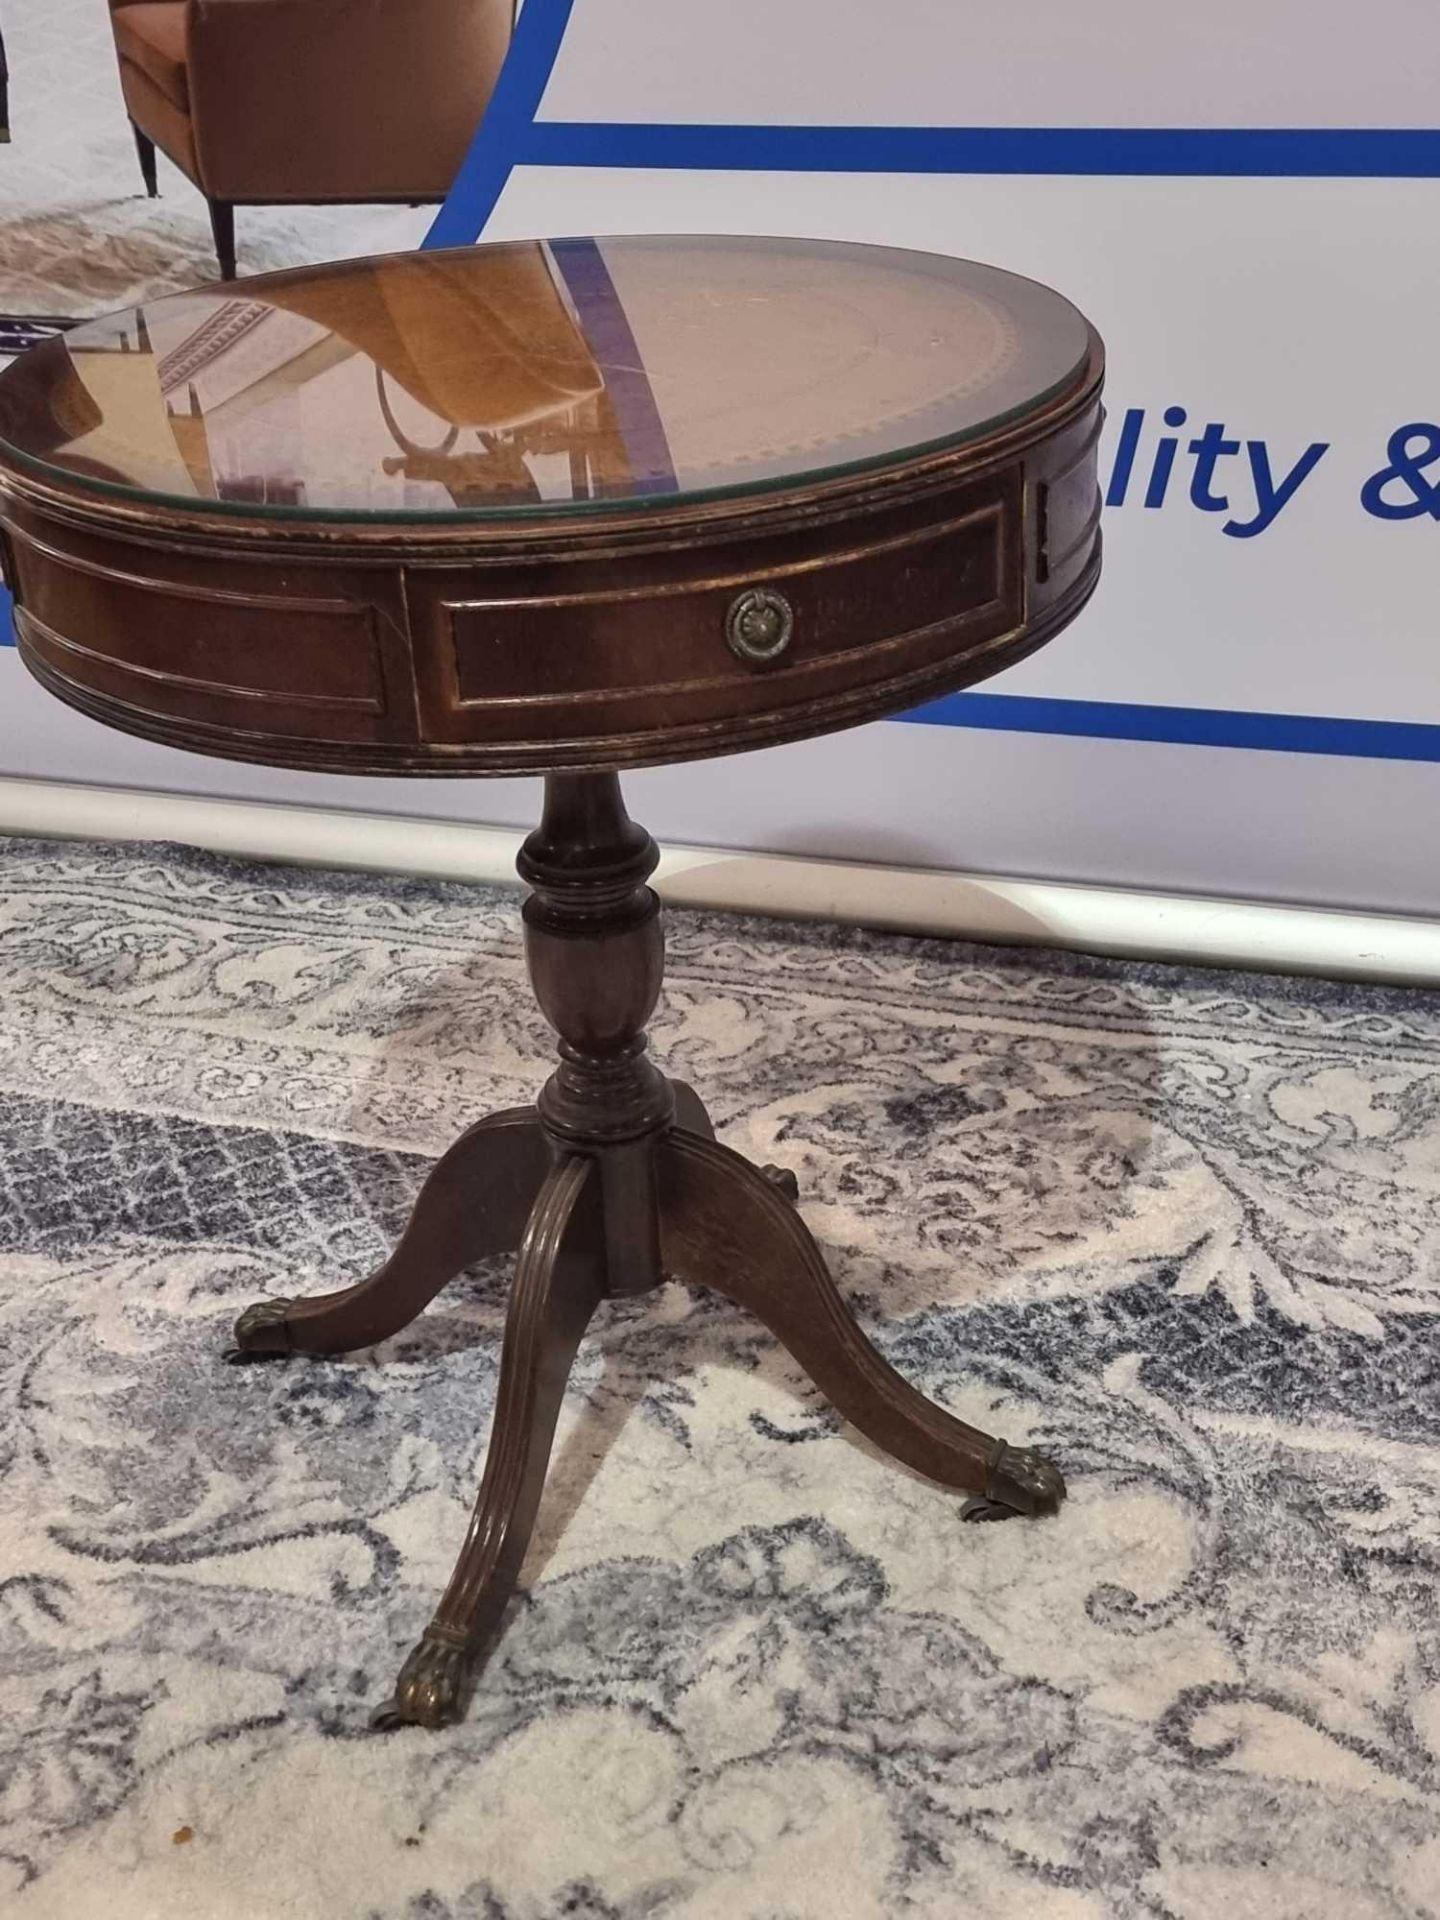 A Regency Style Mahogany Drum Table With Leather Inlay Top And Glass Protector Over The Apron - Image 3 of 5